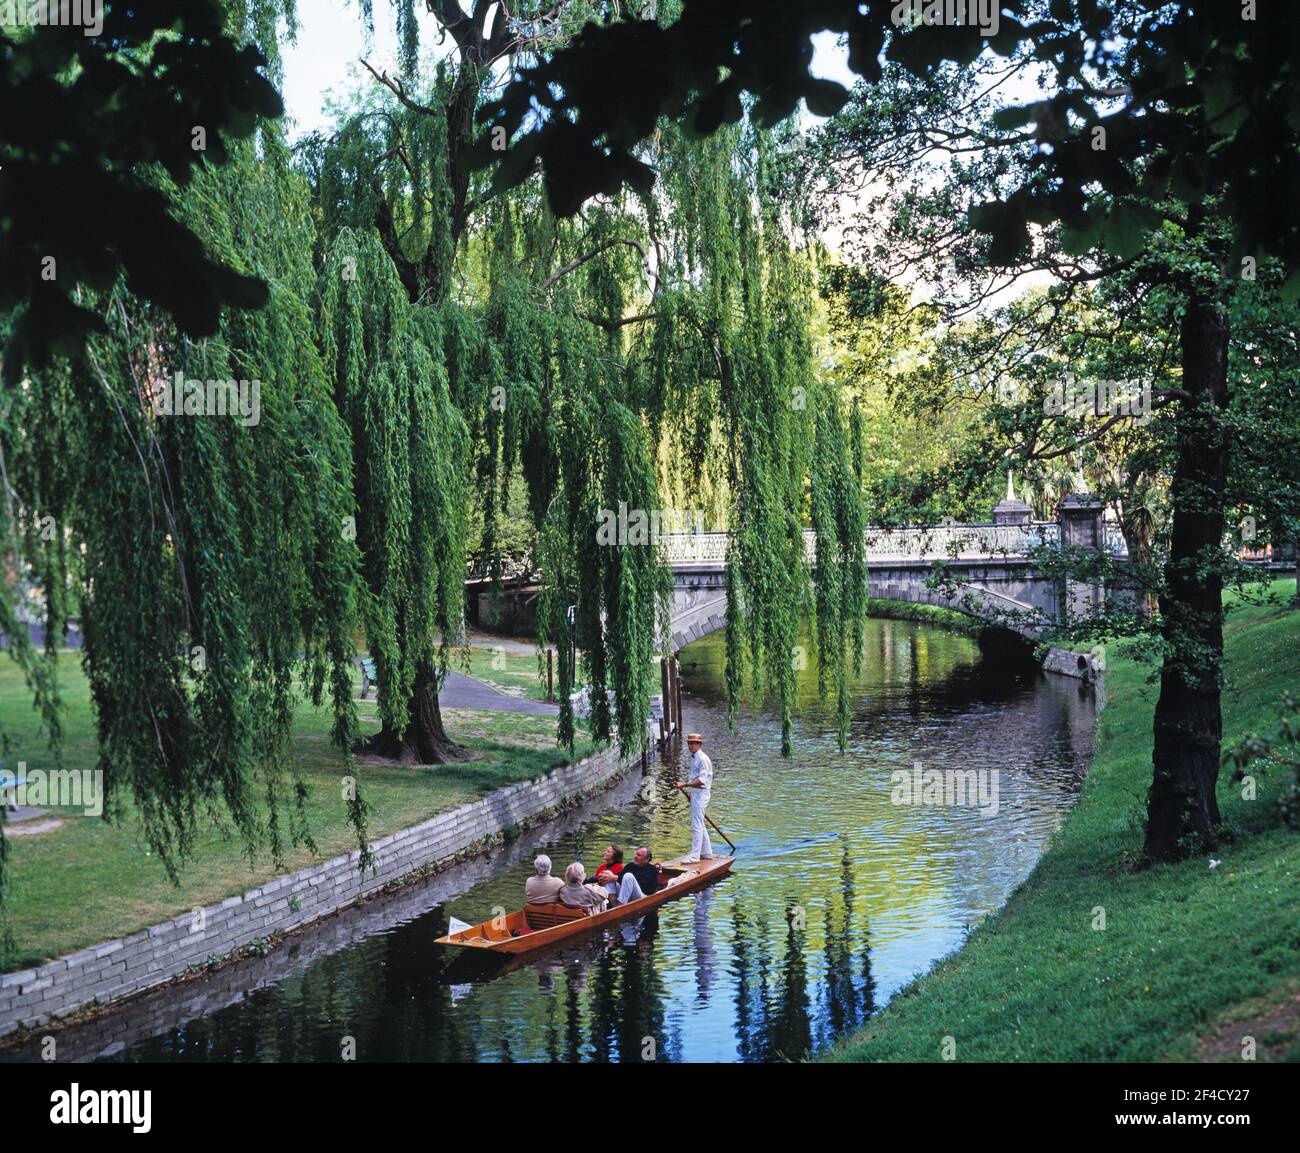 New Zealand. South Island. Christchurch city. Tourists punting on the Avon river. Stock Photo